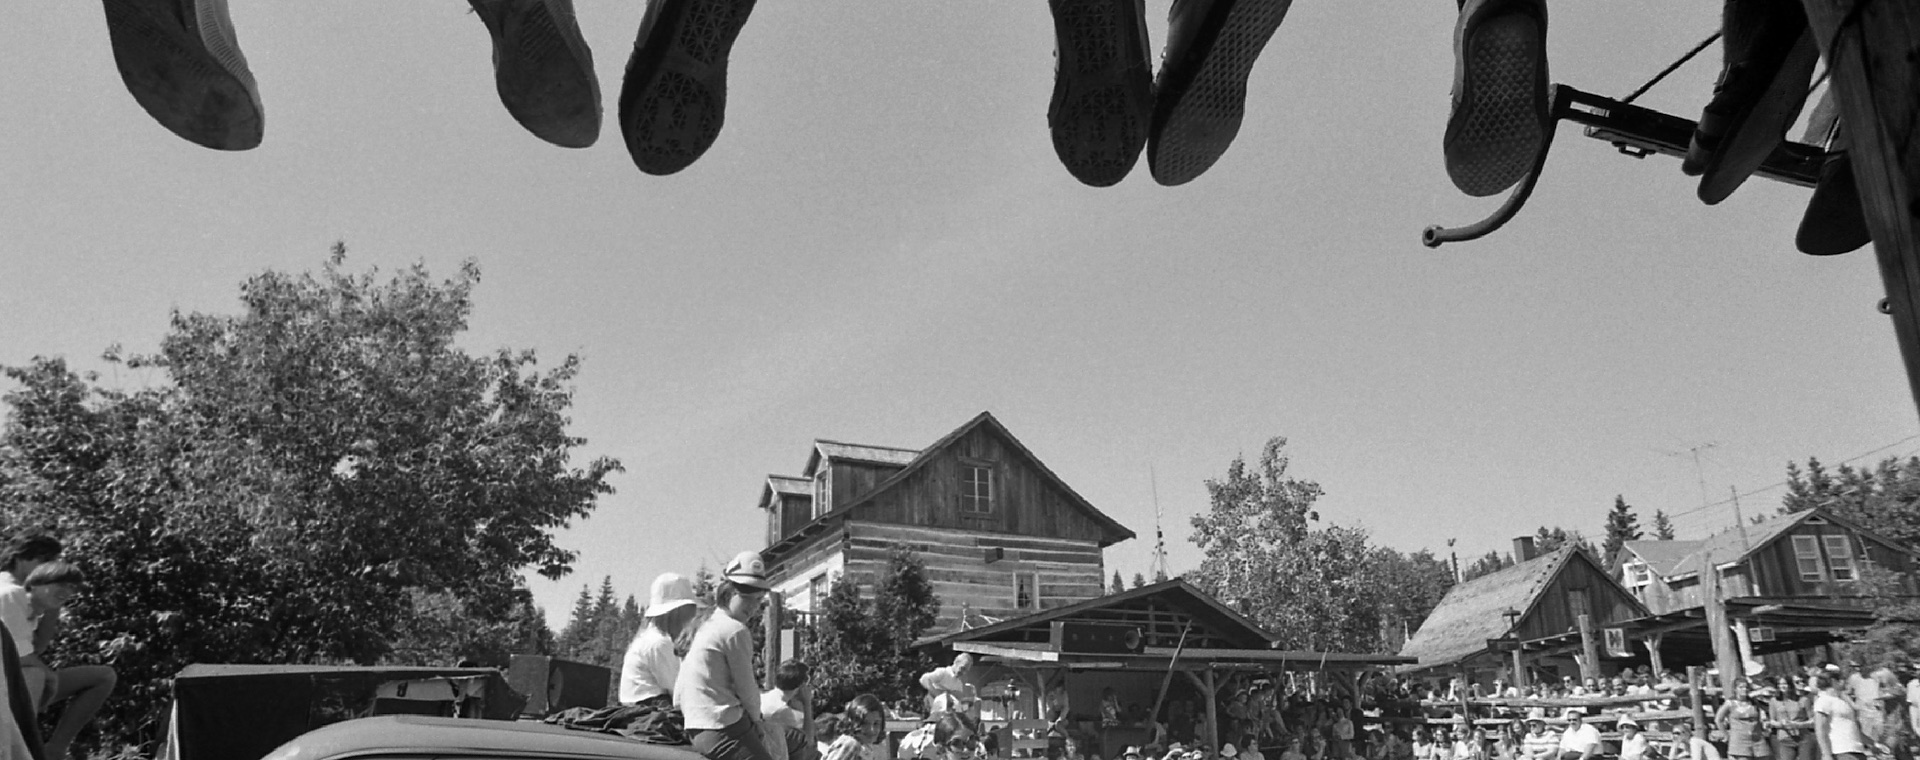 Black and white photo of about 100 spectators attending an outdoor performance at La Butte. At the top of the picture, the feet of people sitting on part of the roof of La Butte can be seen.